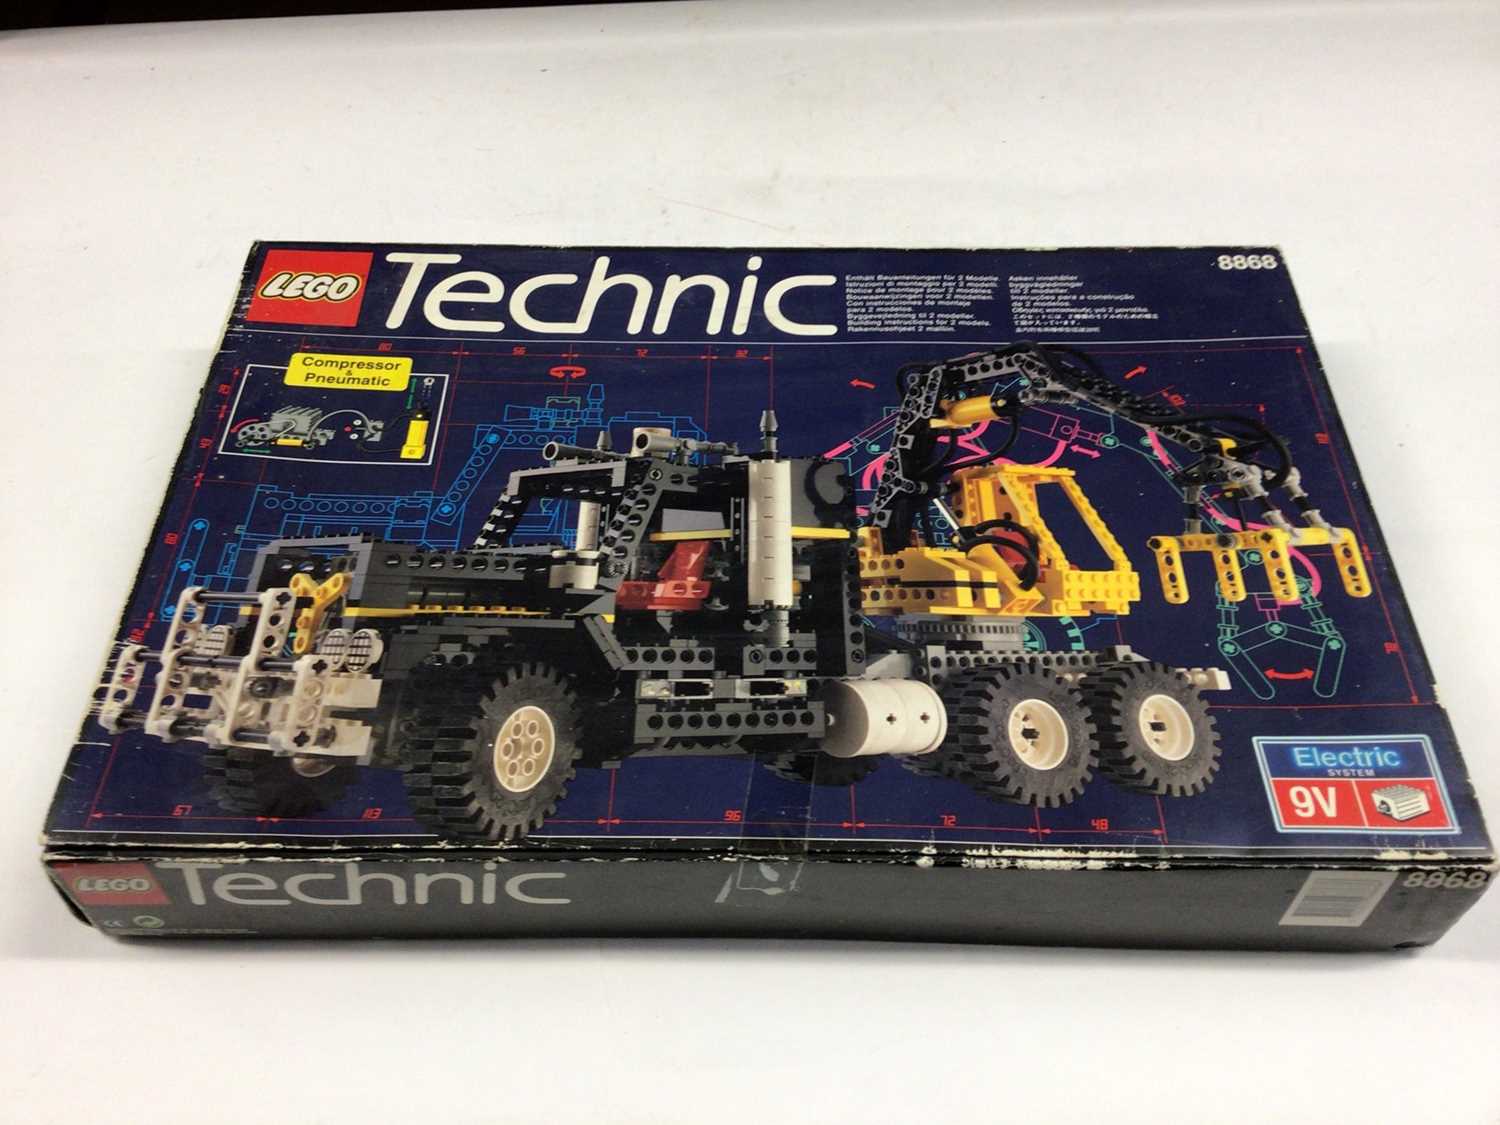 Lot 53 - Lego Technic 8868 Pneumatic Crane Loader with instructions, Boxed